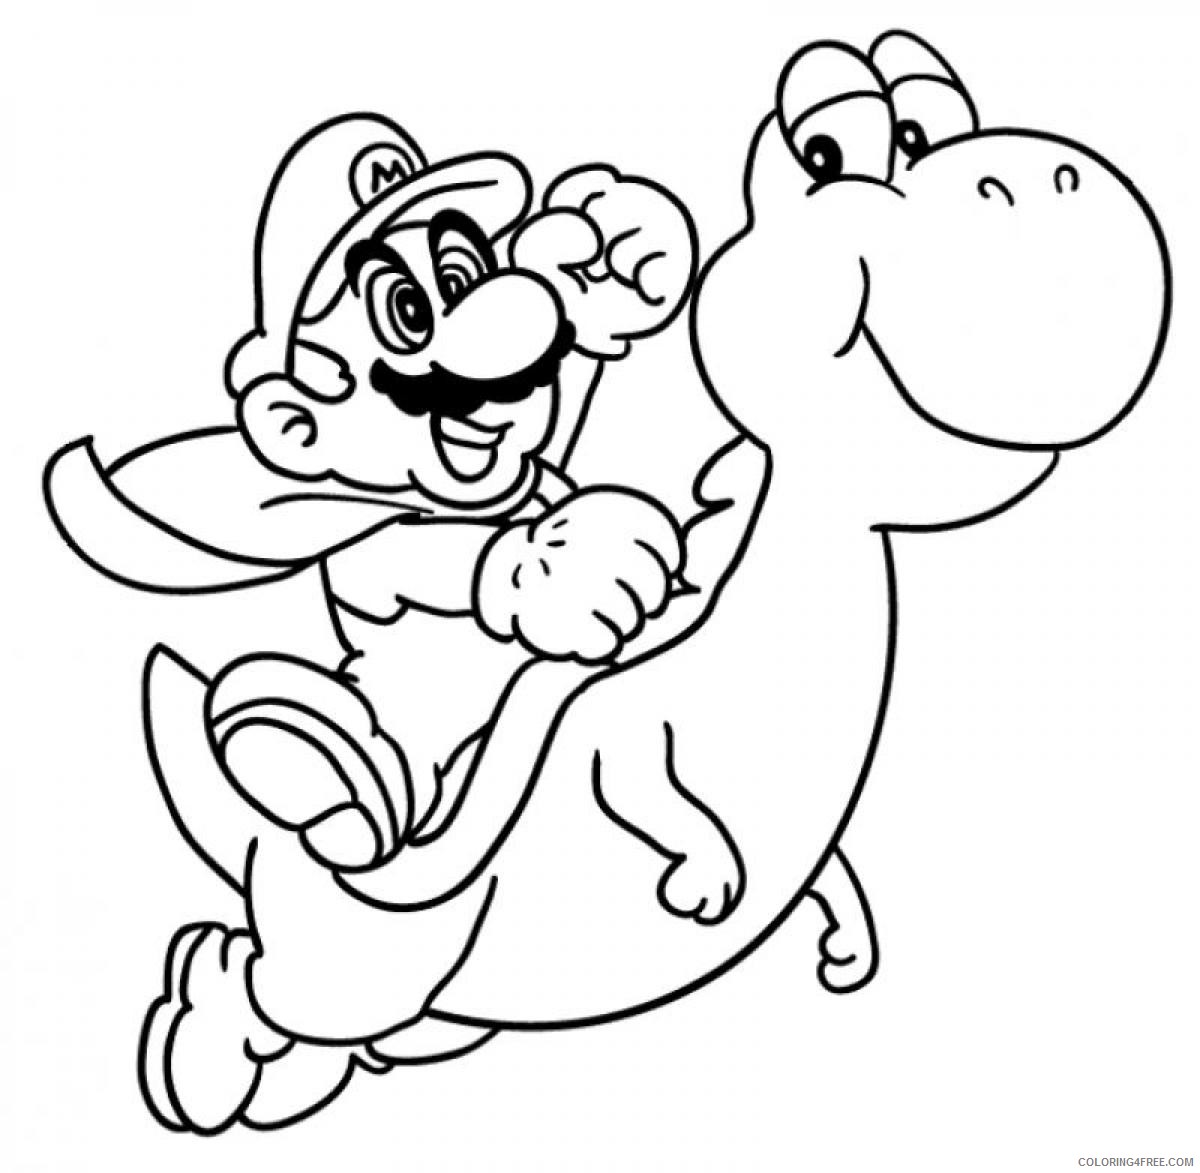 mario and yoshi coloring pages Coloring4free